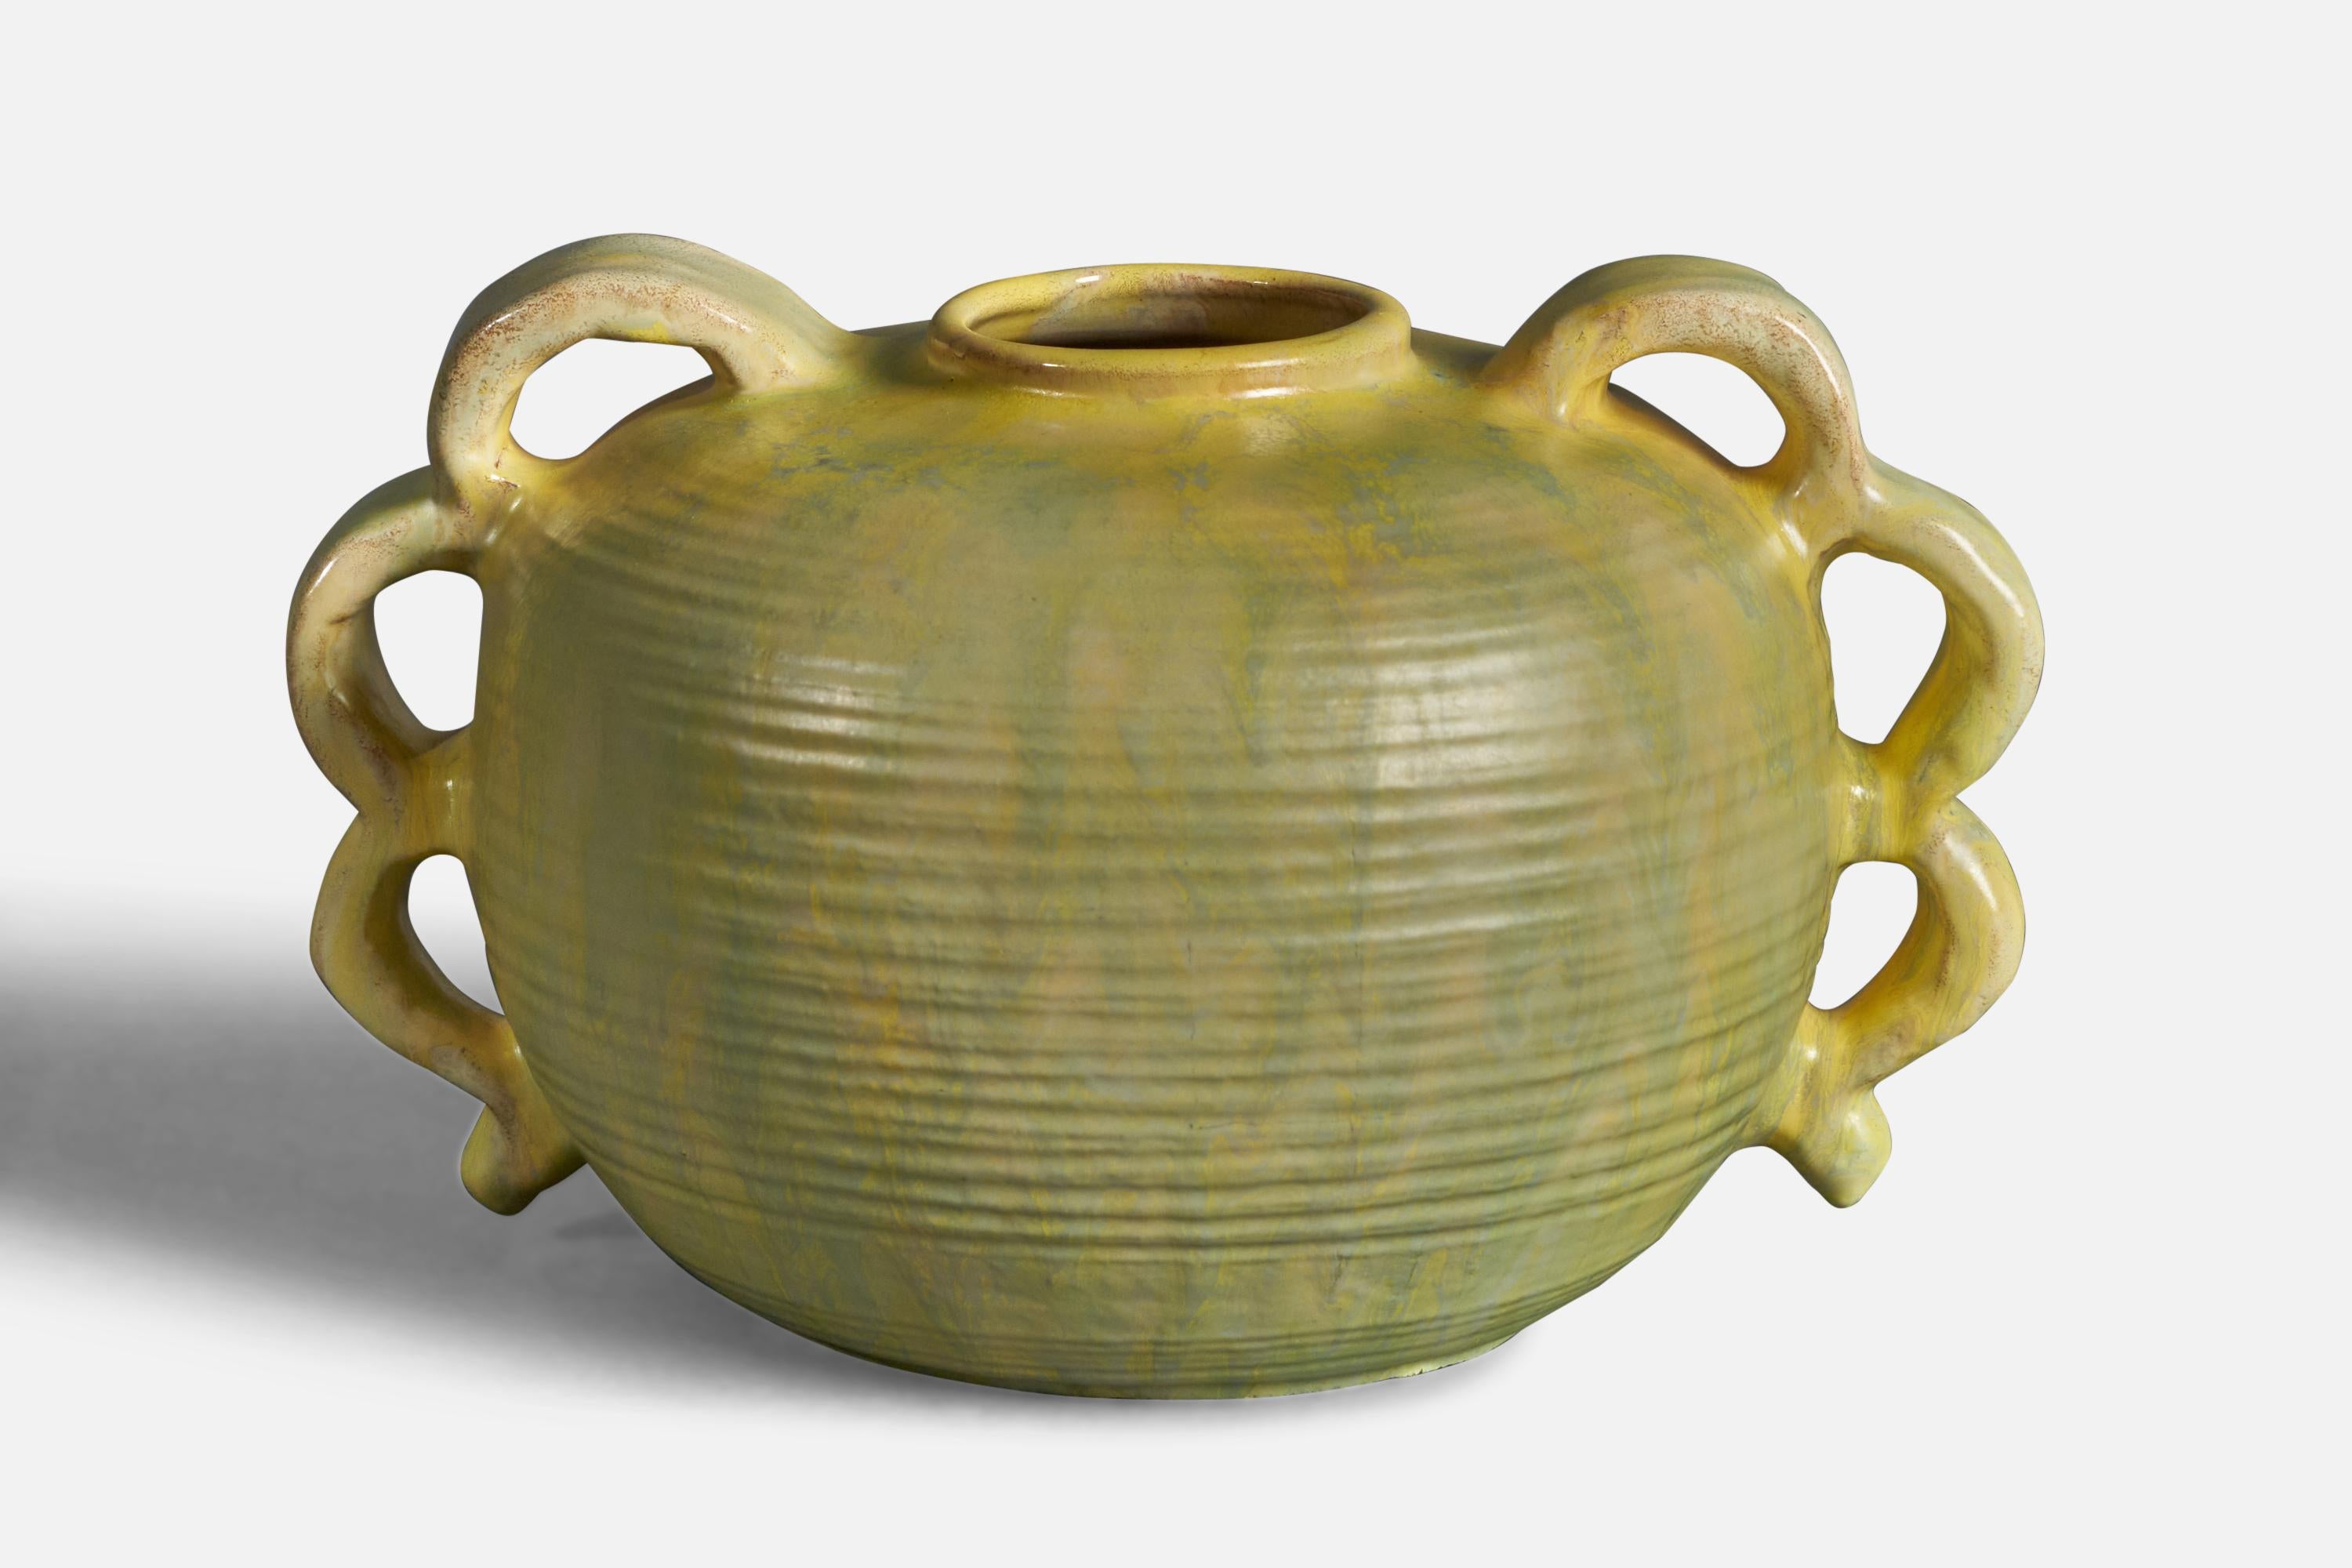 A yellow glazed and incised earthenware vase attributed to Upsala Ekeby, Sweden, c. 1930s.